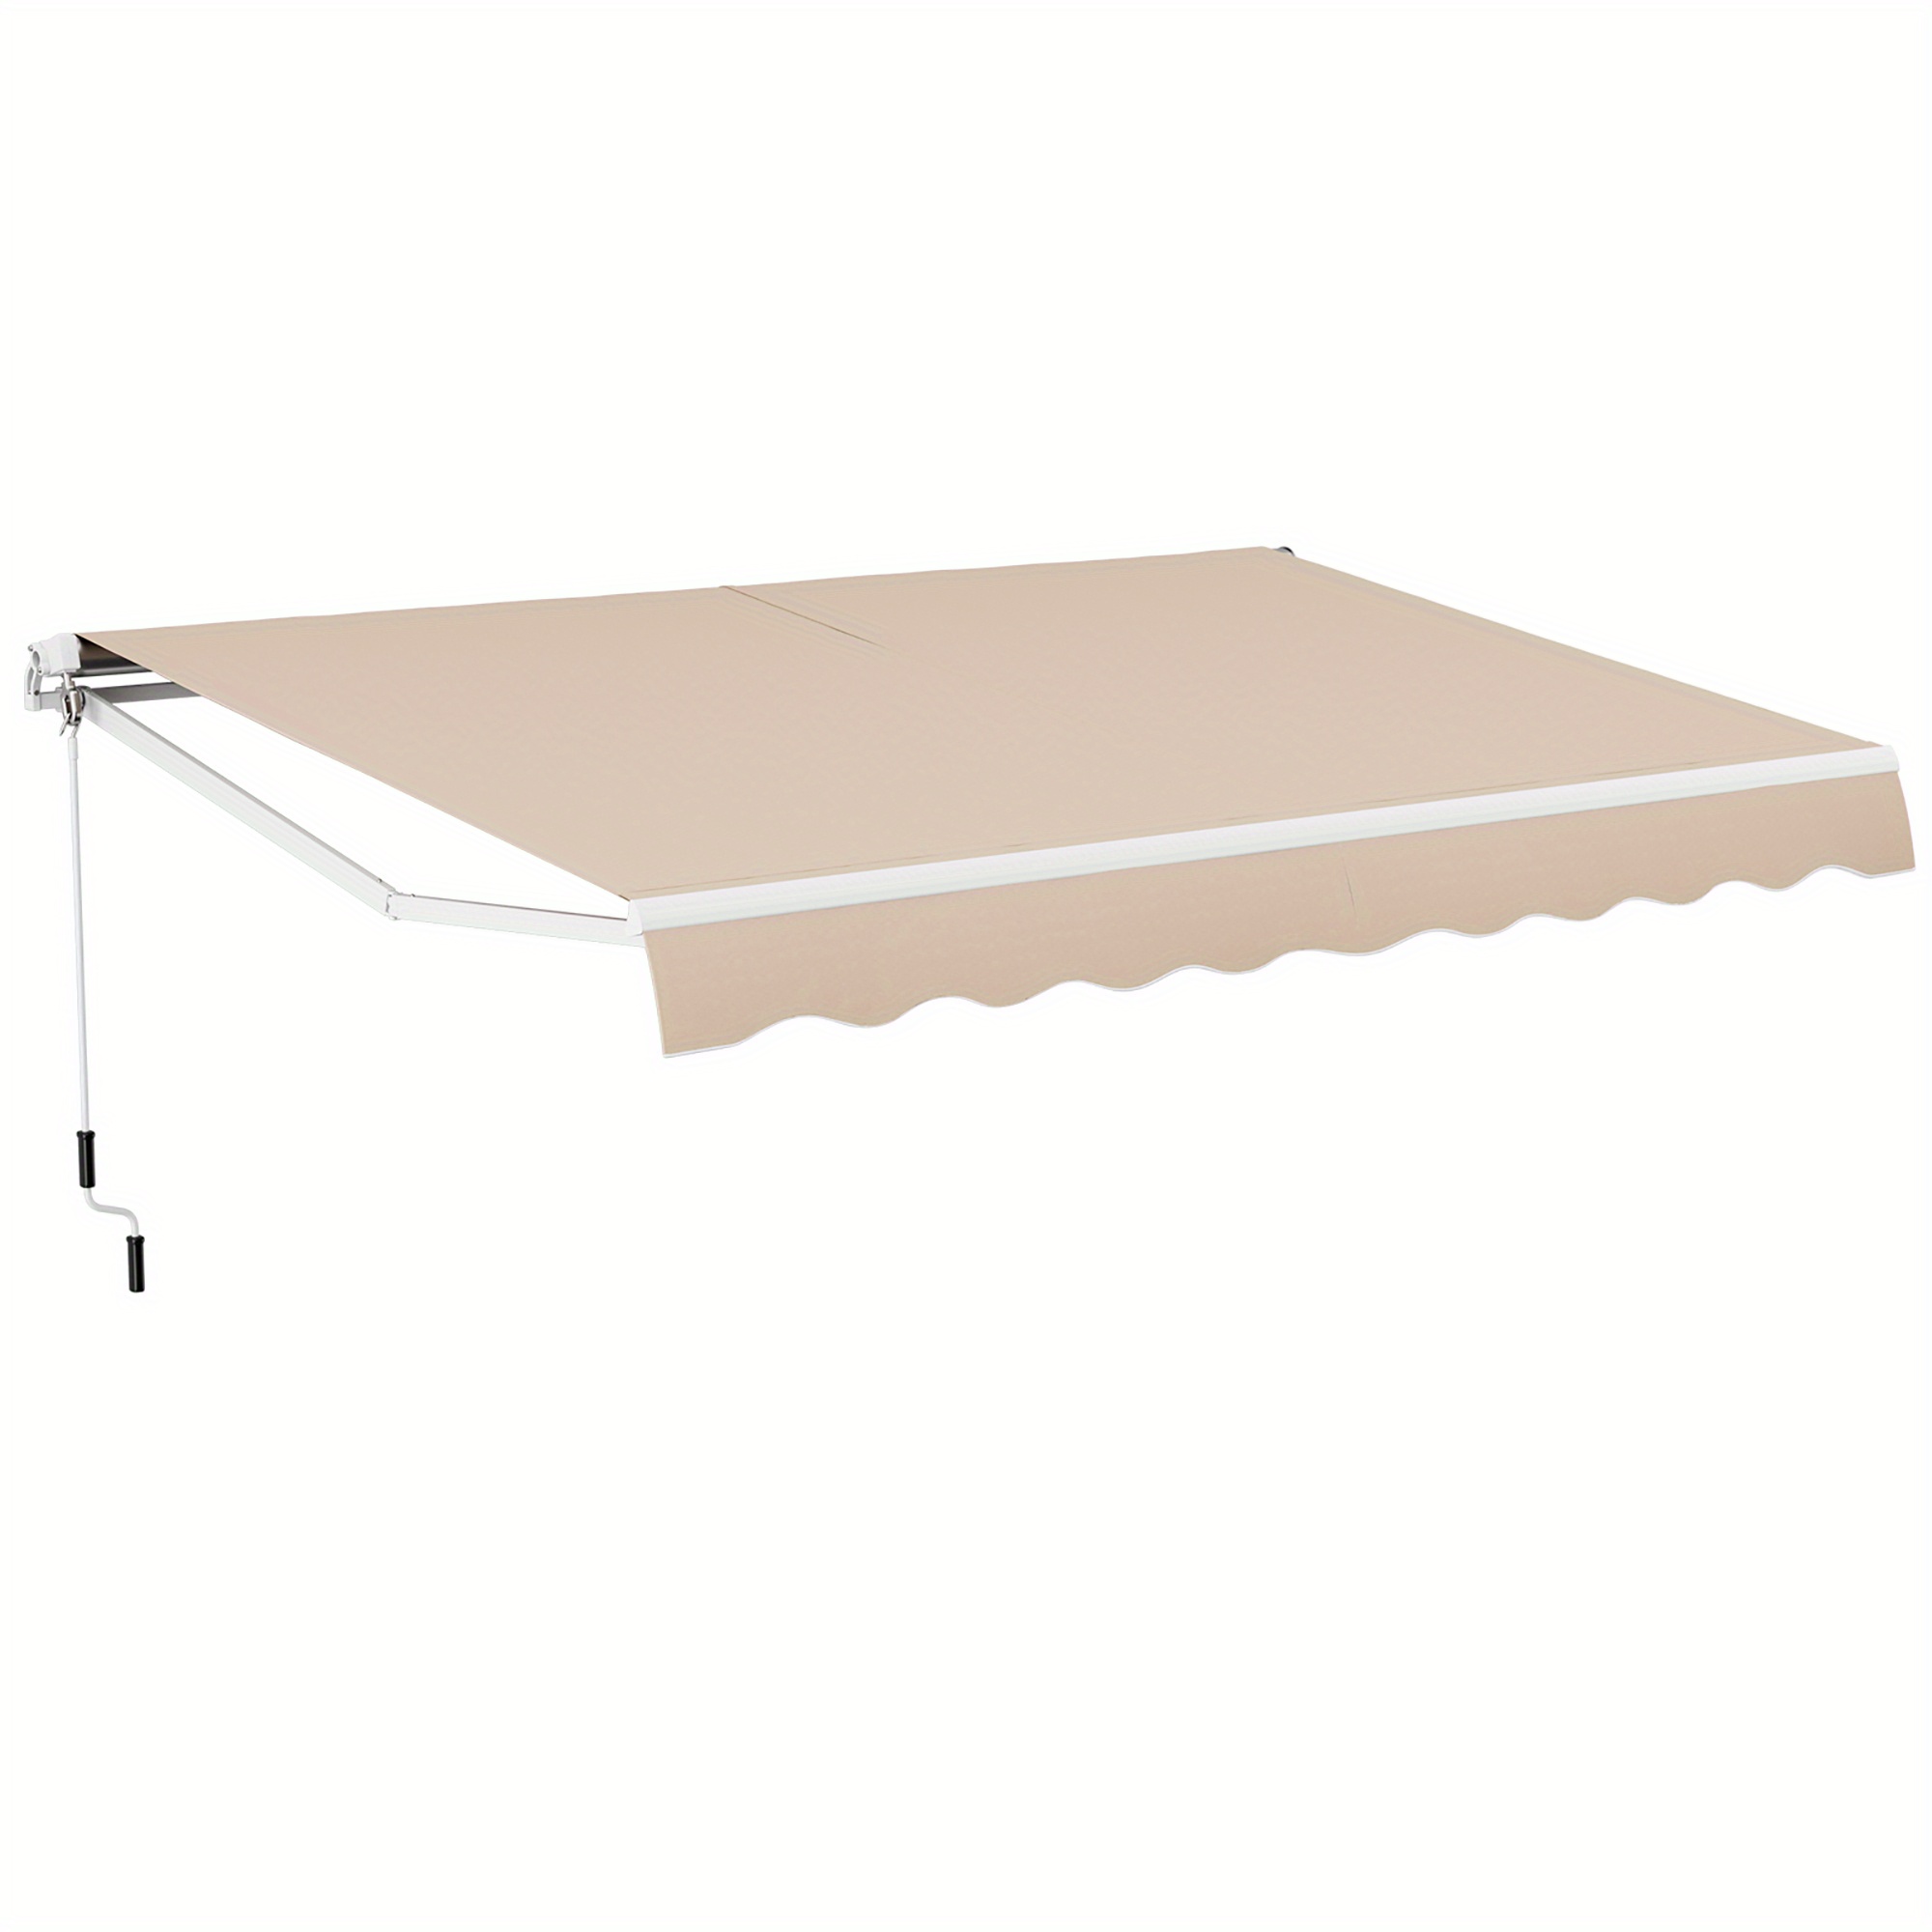 

Gymax 13 X 8.2 Ft Outdoor Patio Retractable Awning Polyester Sunshade Cover W/ Manual Crank Handle Deck Beige